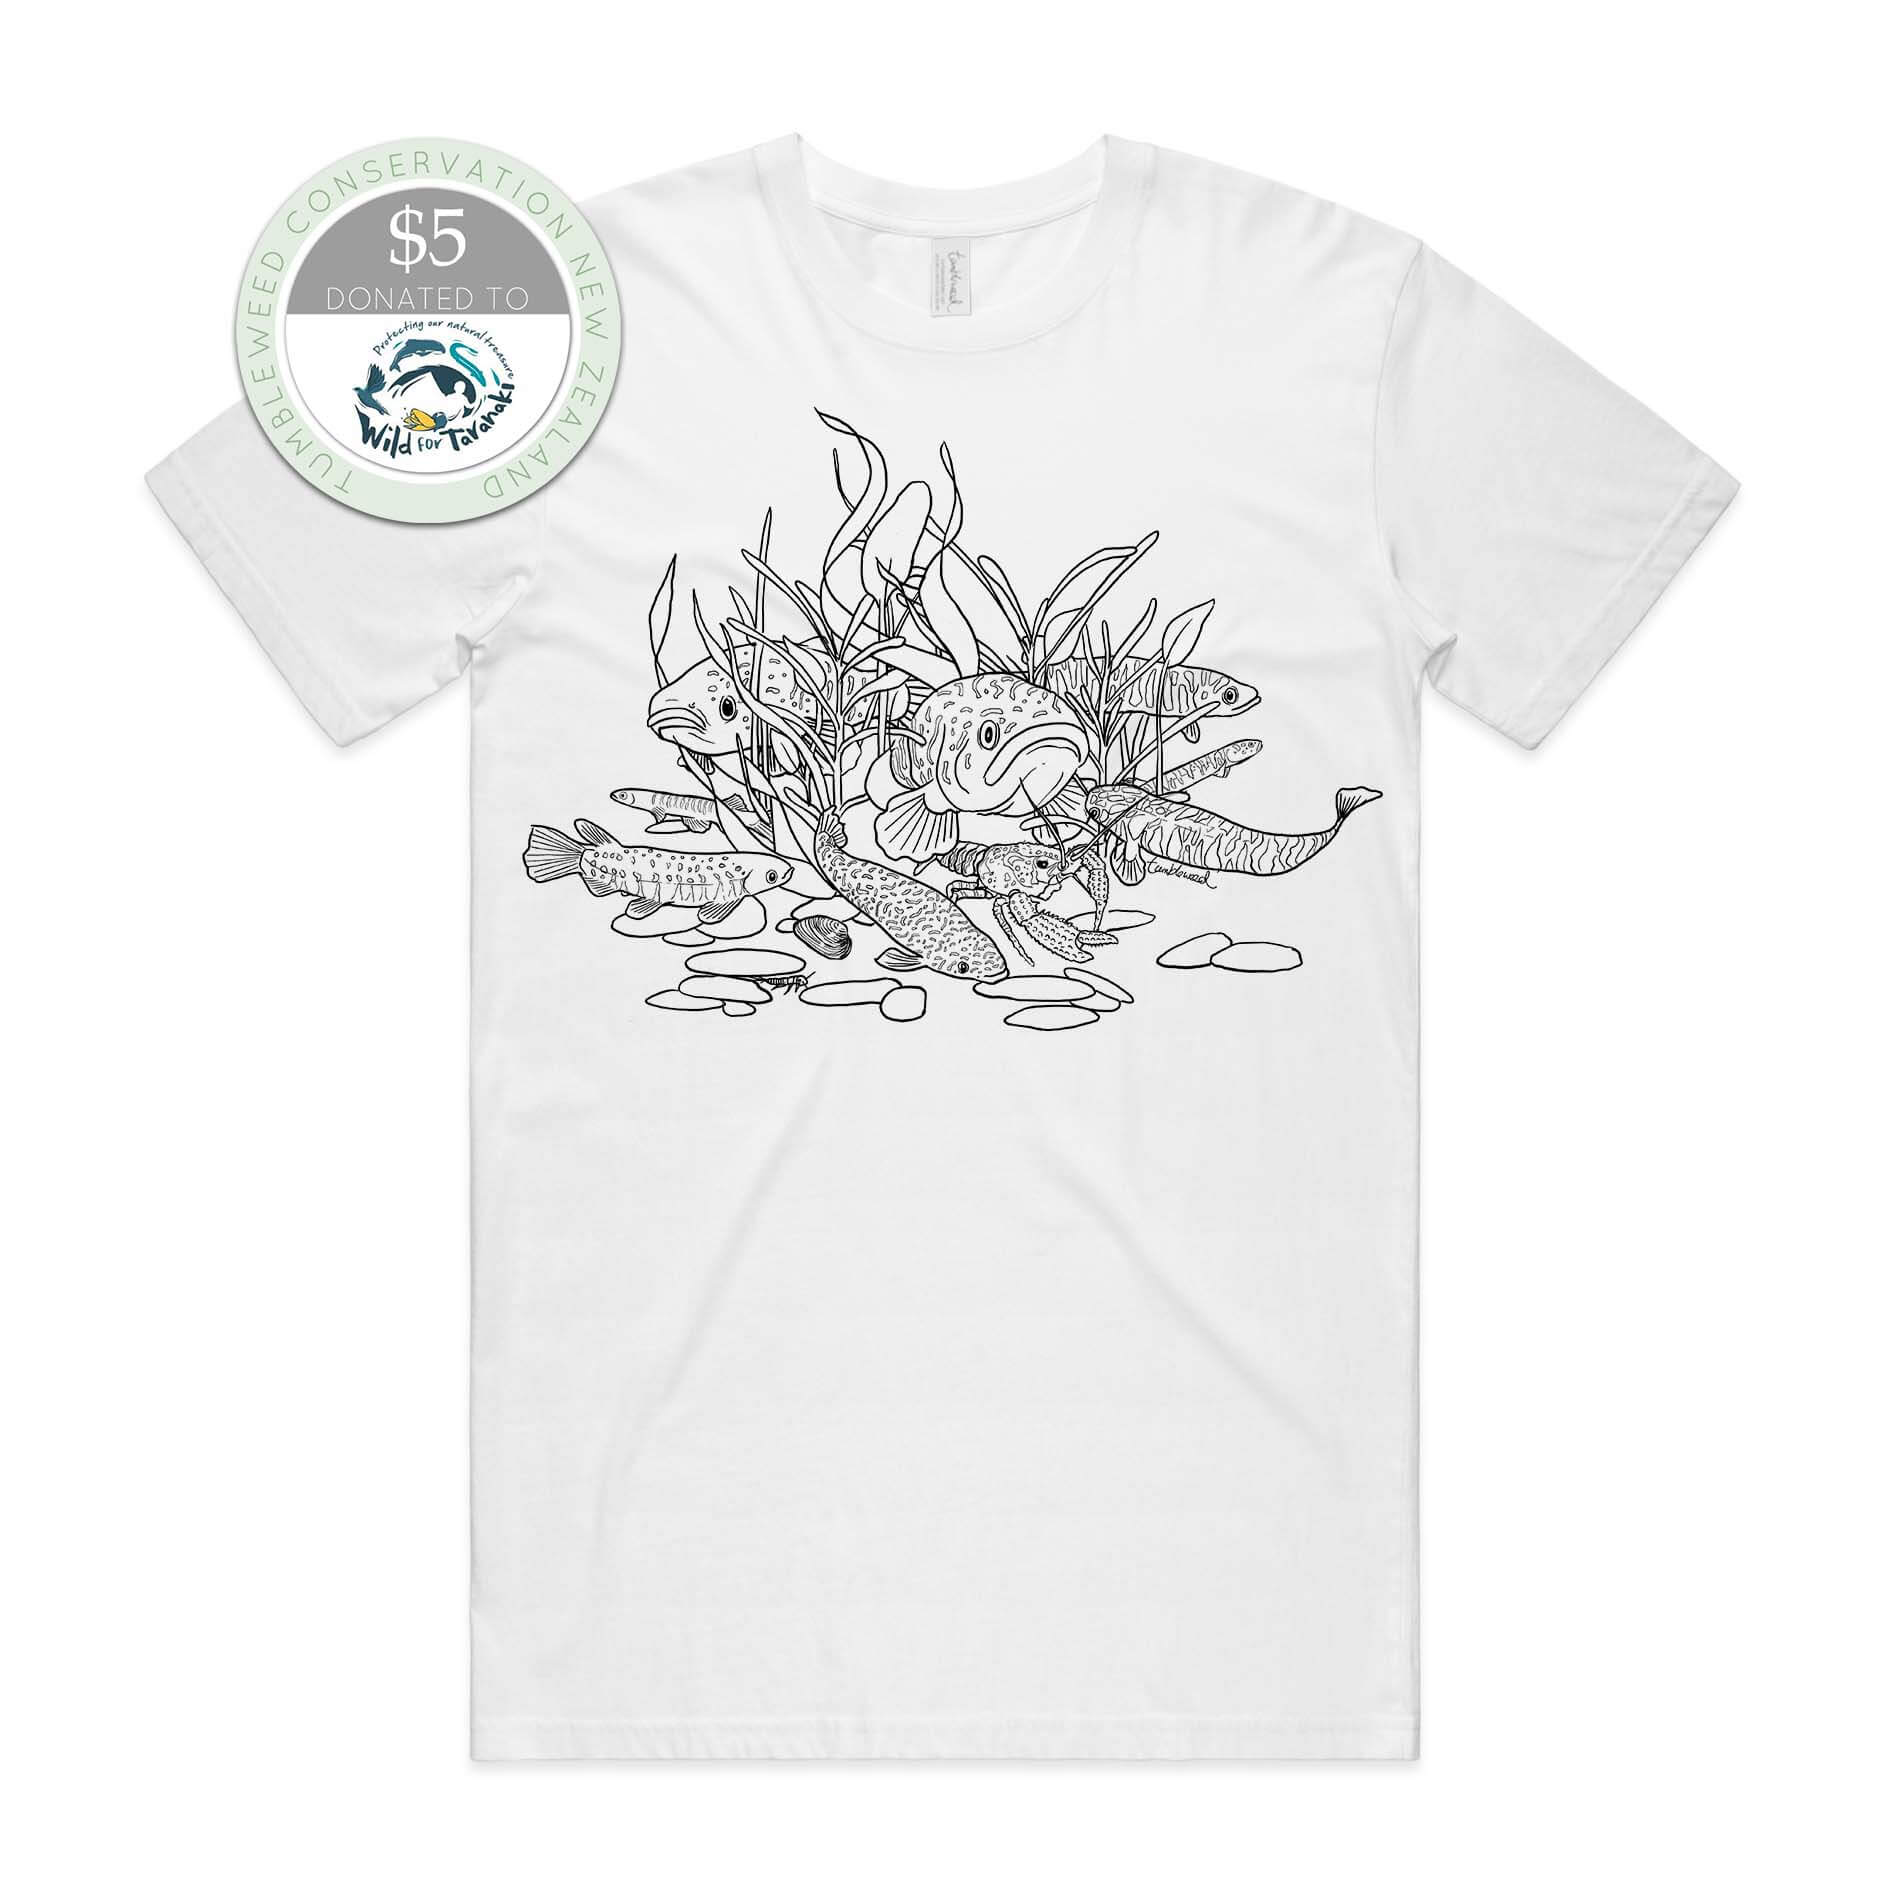 White, female t-shirt featuring a screen printed Freshwater fish design.